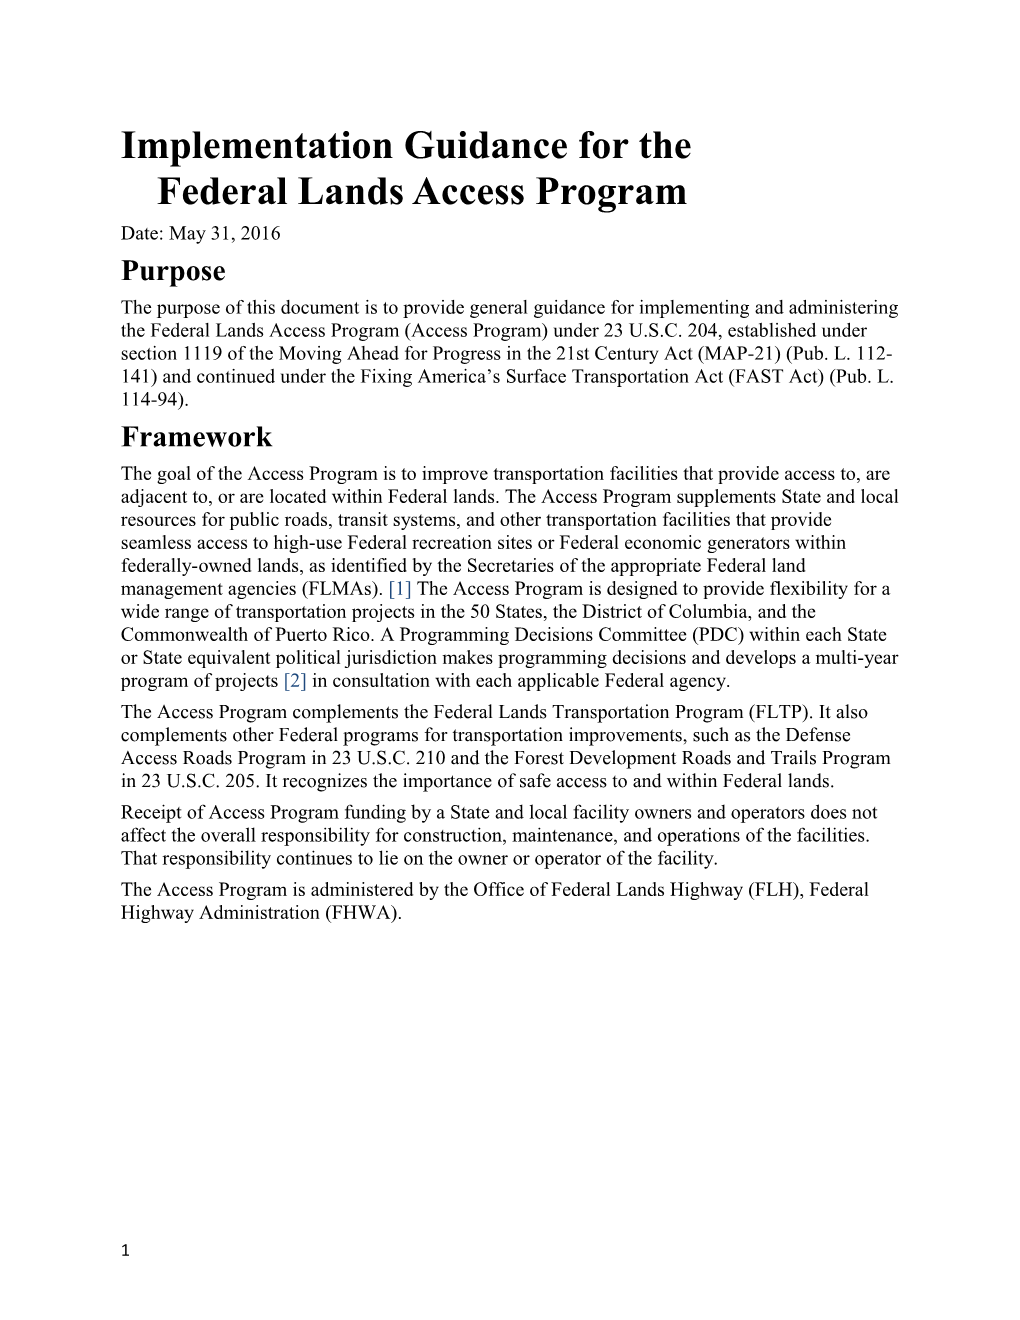 Implementation Guidance for Thefederal Lands Access Program